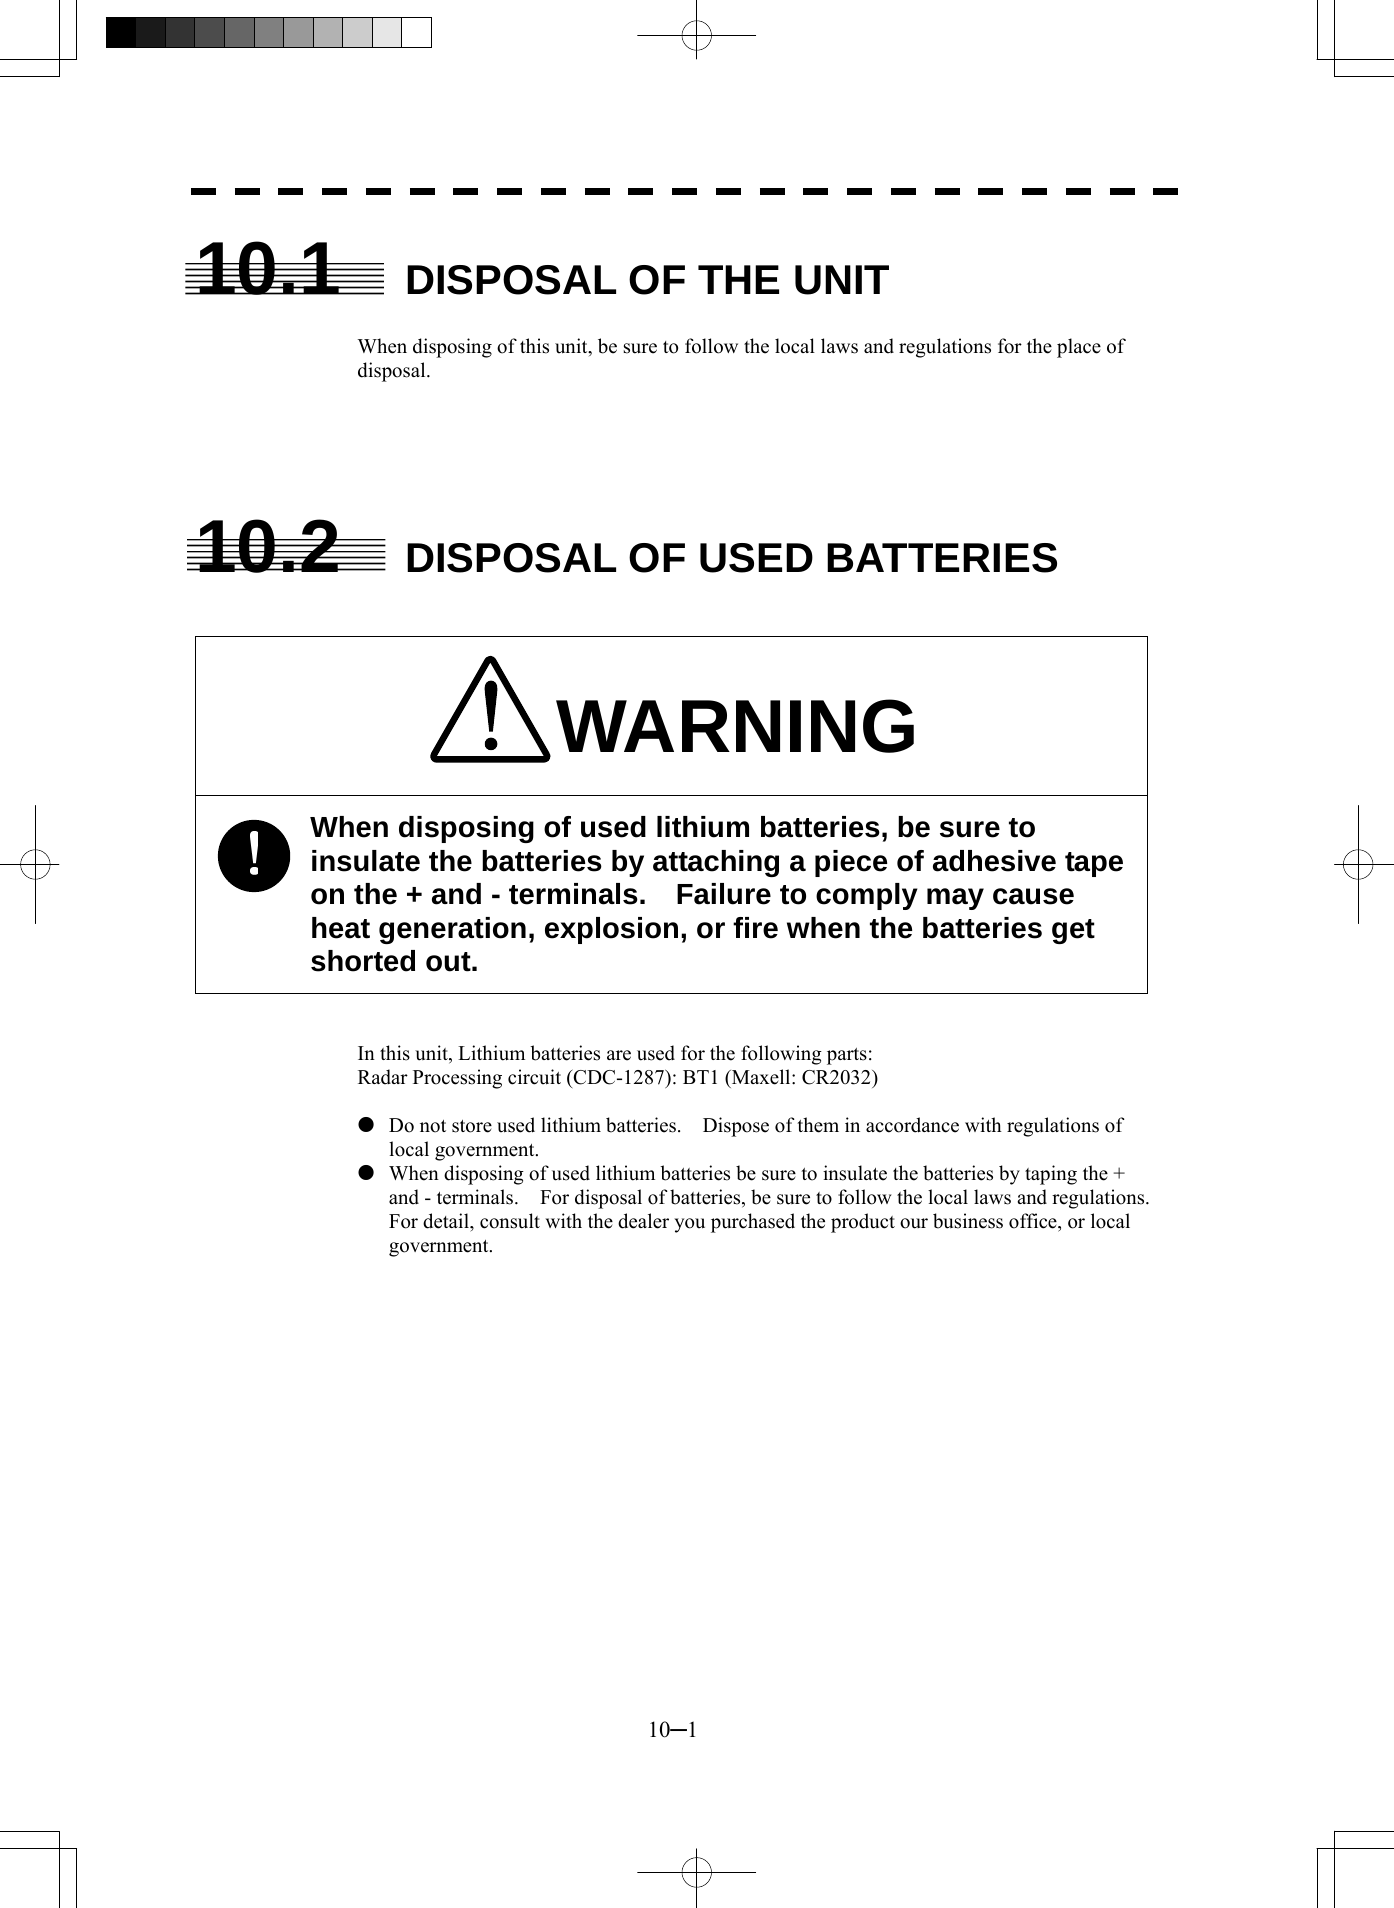  10─1 10.1  DISPOSAL OF THE UNIT  When disposing of this unit, be sure to follow the local laws and regulations for the place of disposal.      10.2  DISPOSAL OF USED BATTERIES   WARNING When disposing of used lithium batteries, be sure to insulate the batteries by attaching a piece of adhesive tape on the + and - terminals.    Failure to comply may cause heat generation, explosion, or fire when the batteries get shorted out.   In this unit, Lithium batteries are used for the following parts: Radar Processing circuit (CDC-1287): BT1 (Maxell: CR2032)  z  Do not store used lithium batteries.    Dispose of them in accordance with regulations of local government. z  When disposing of used lithium batteries be sure to insulate the batteries by taping the + and - terminals.    For disposal of batteries, be sure to follow the local laws and regulations. For detail, consult with the dealer you purchased the product our business office, or local government.  